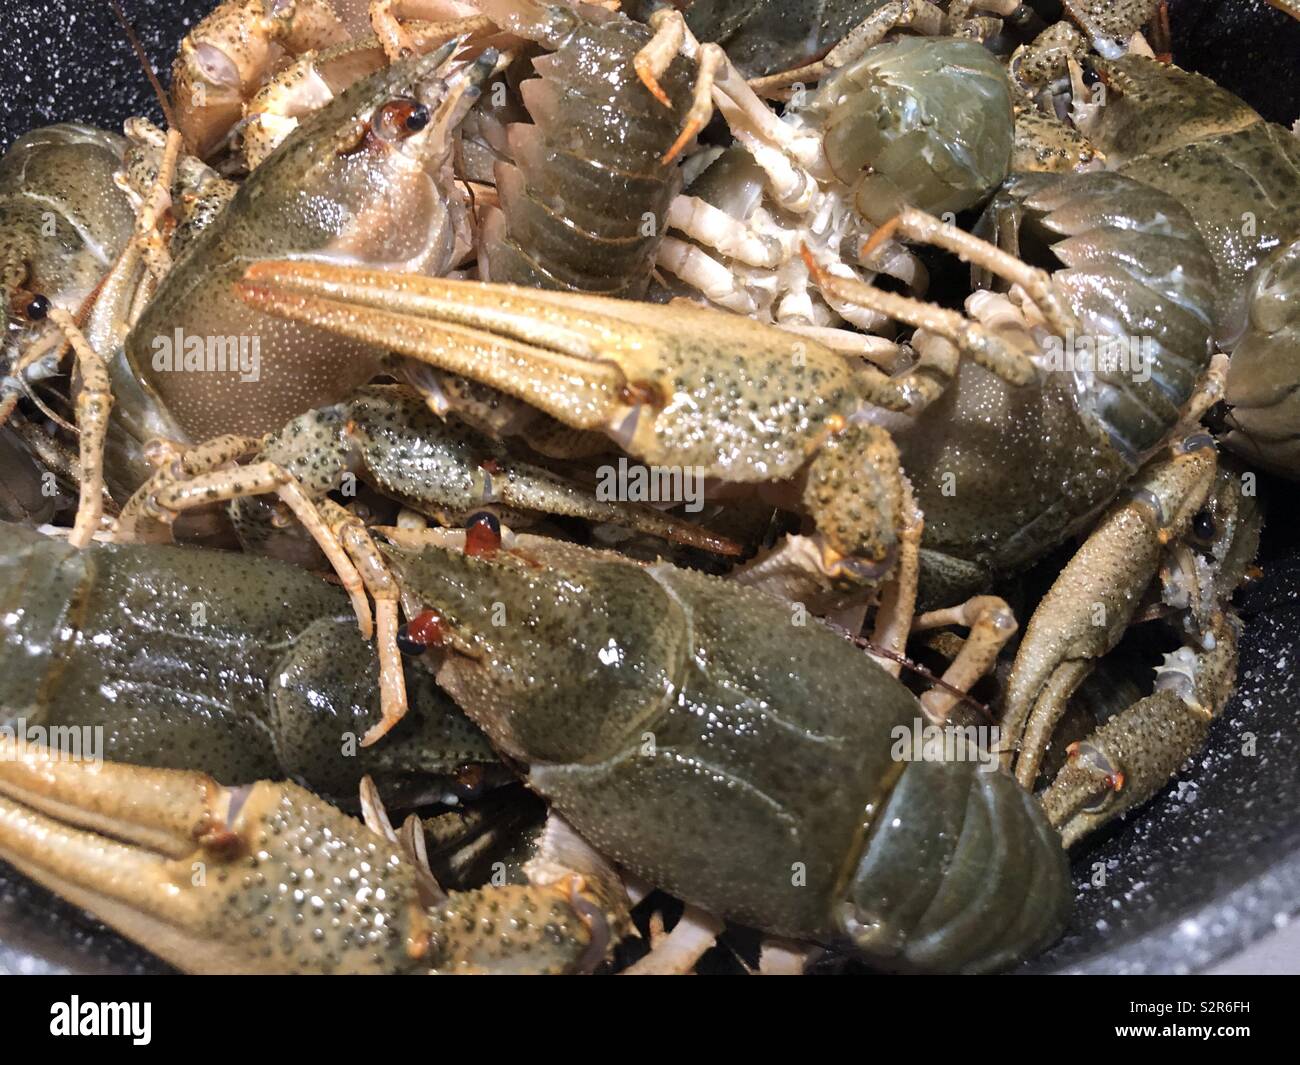 Crayfish, also known as crawfish, crawdads, freshwater lobsters